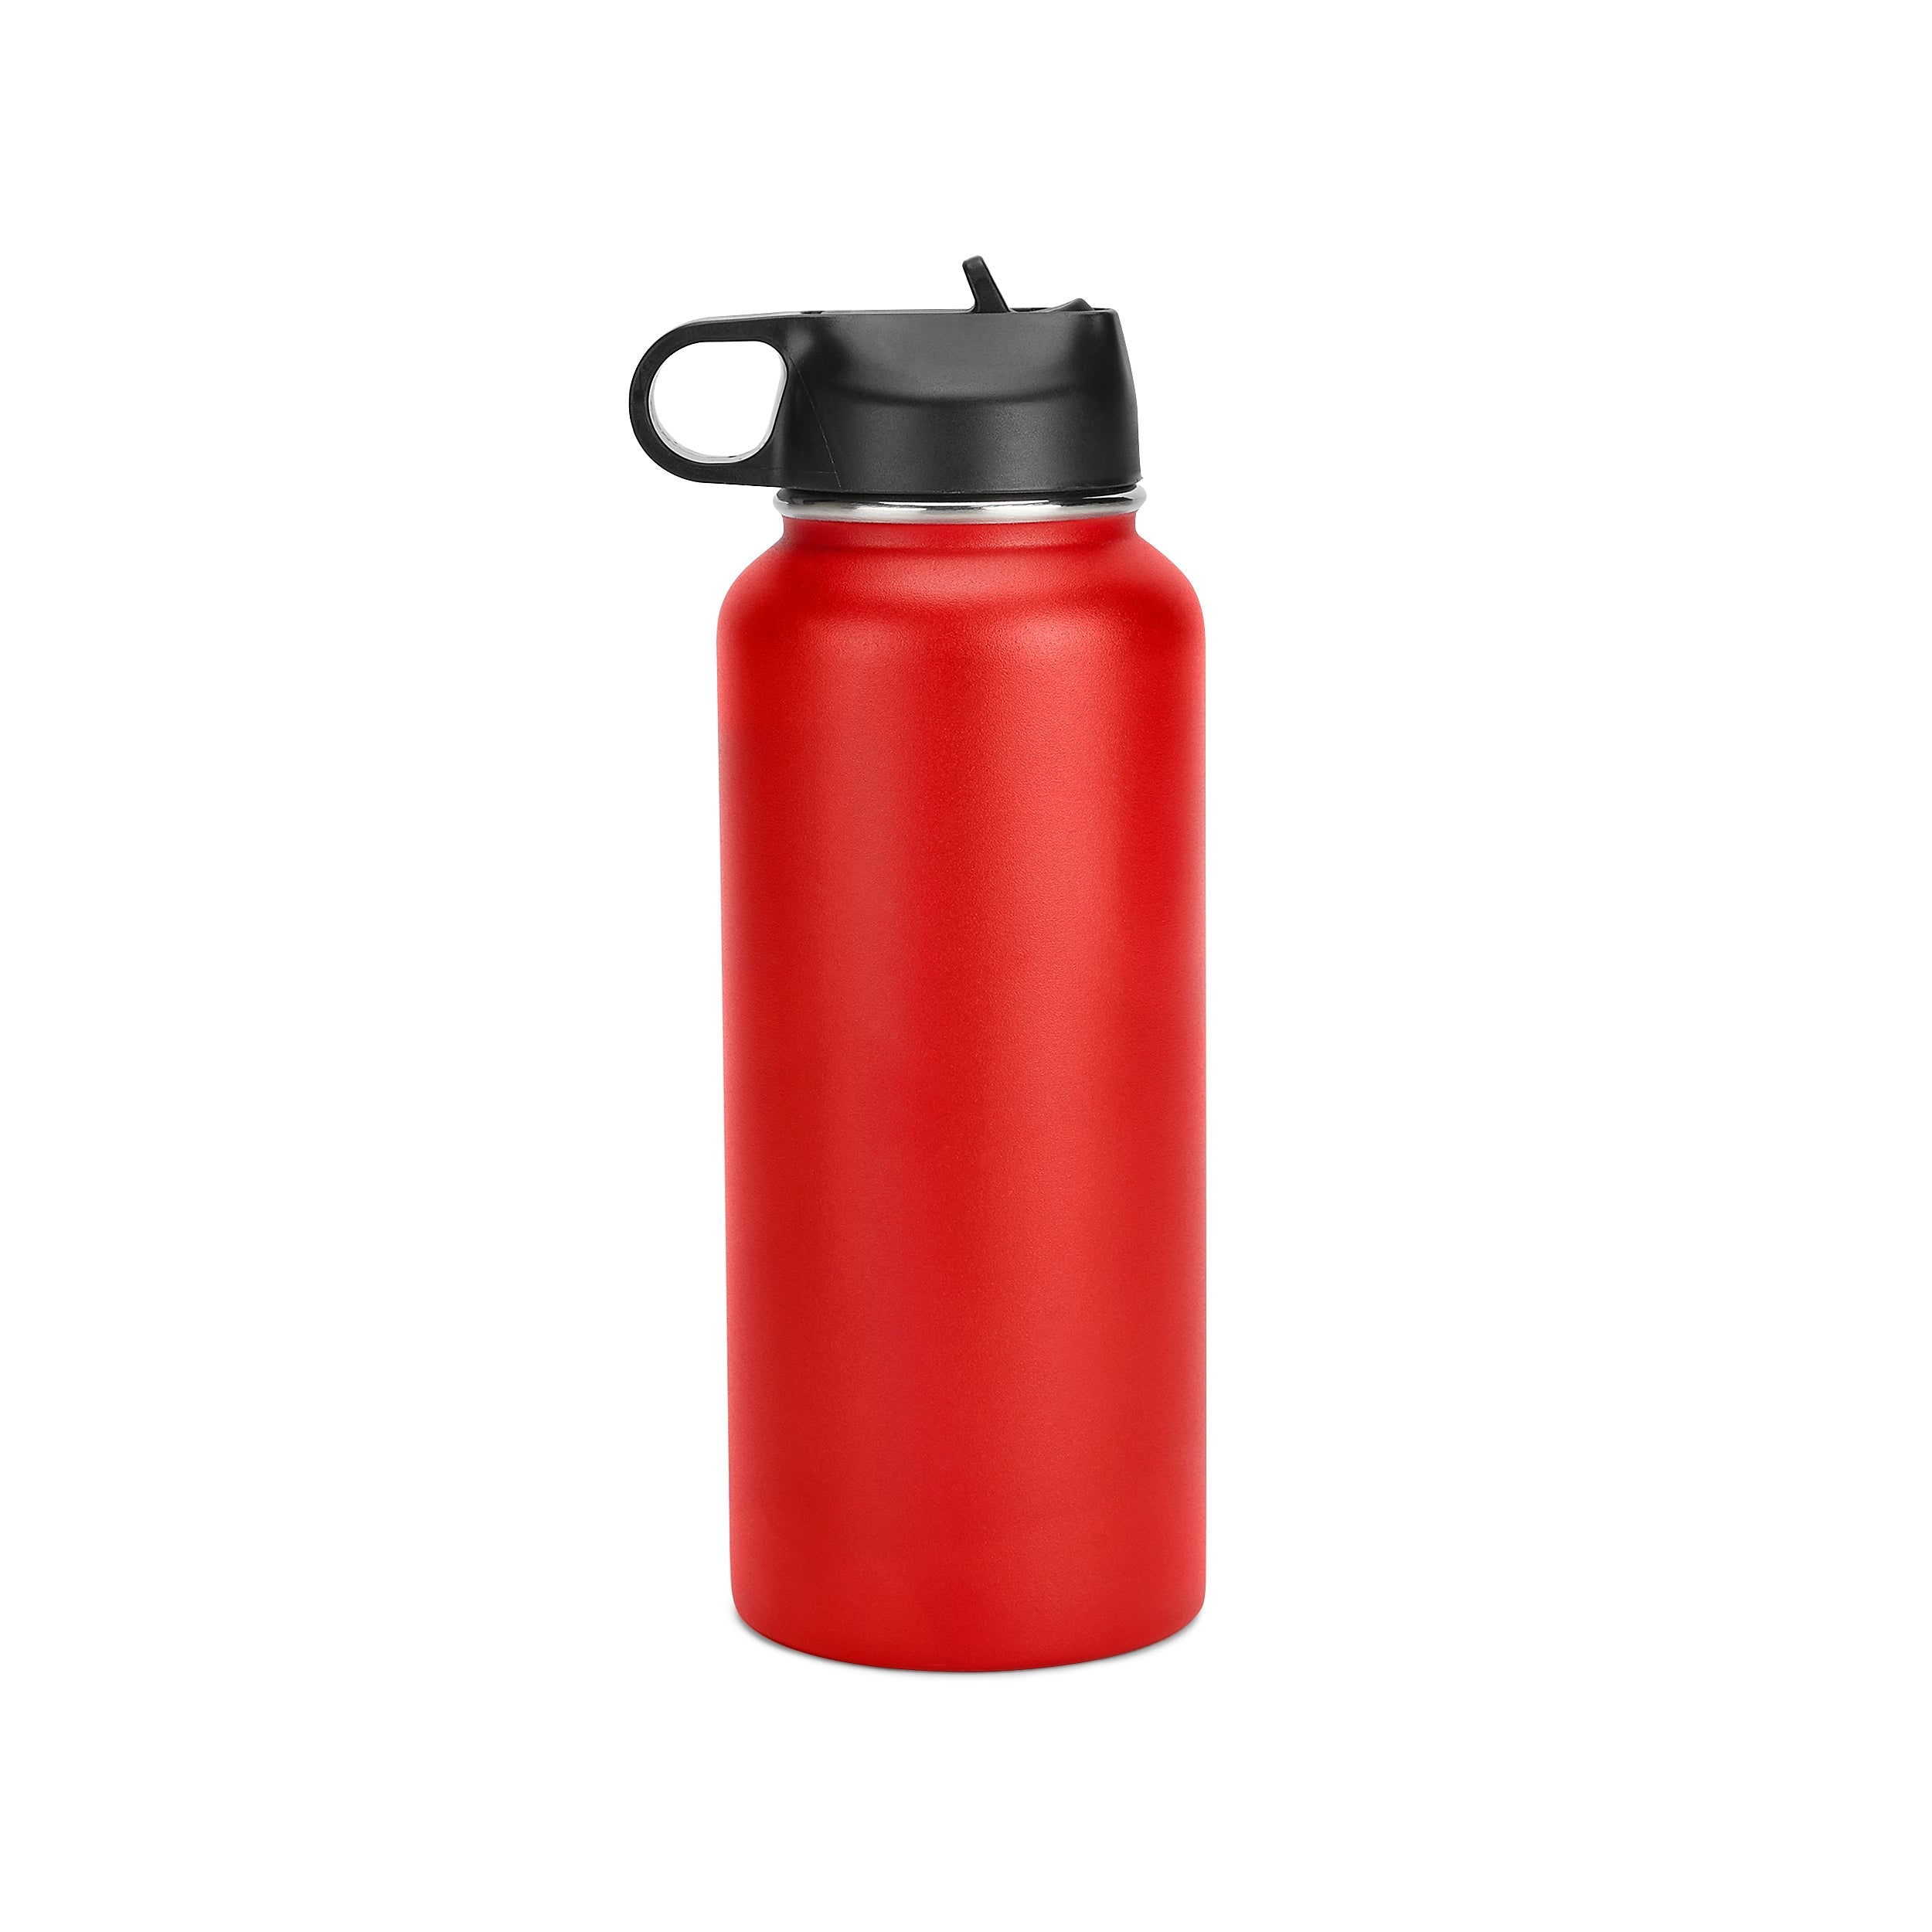 32oz Hydro Water Bottle for Monograms